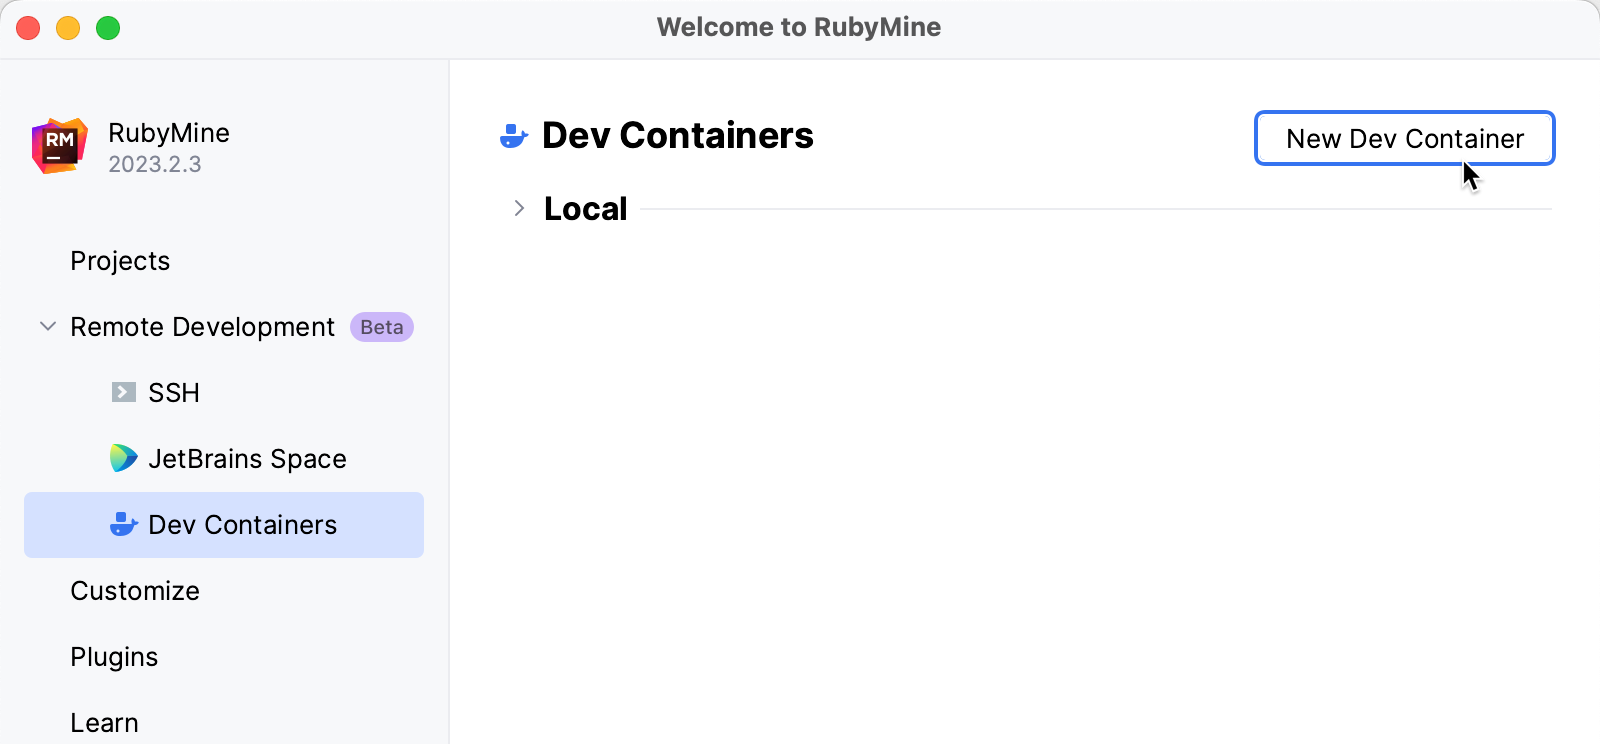 New dev container from RubyMine welcome screen